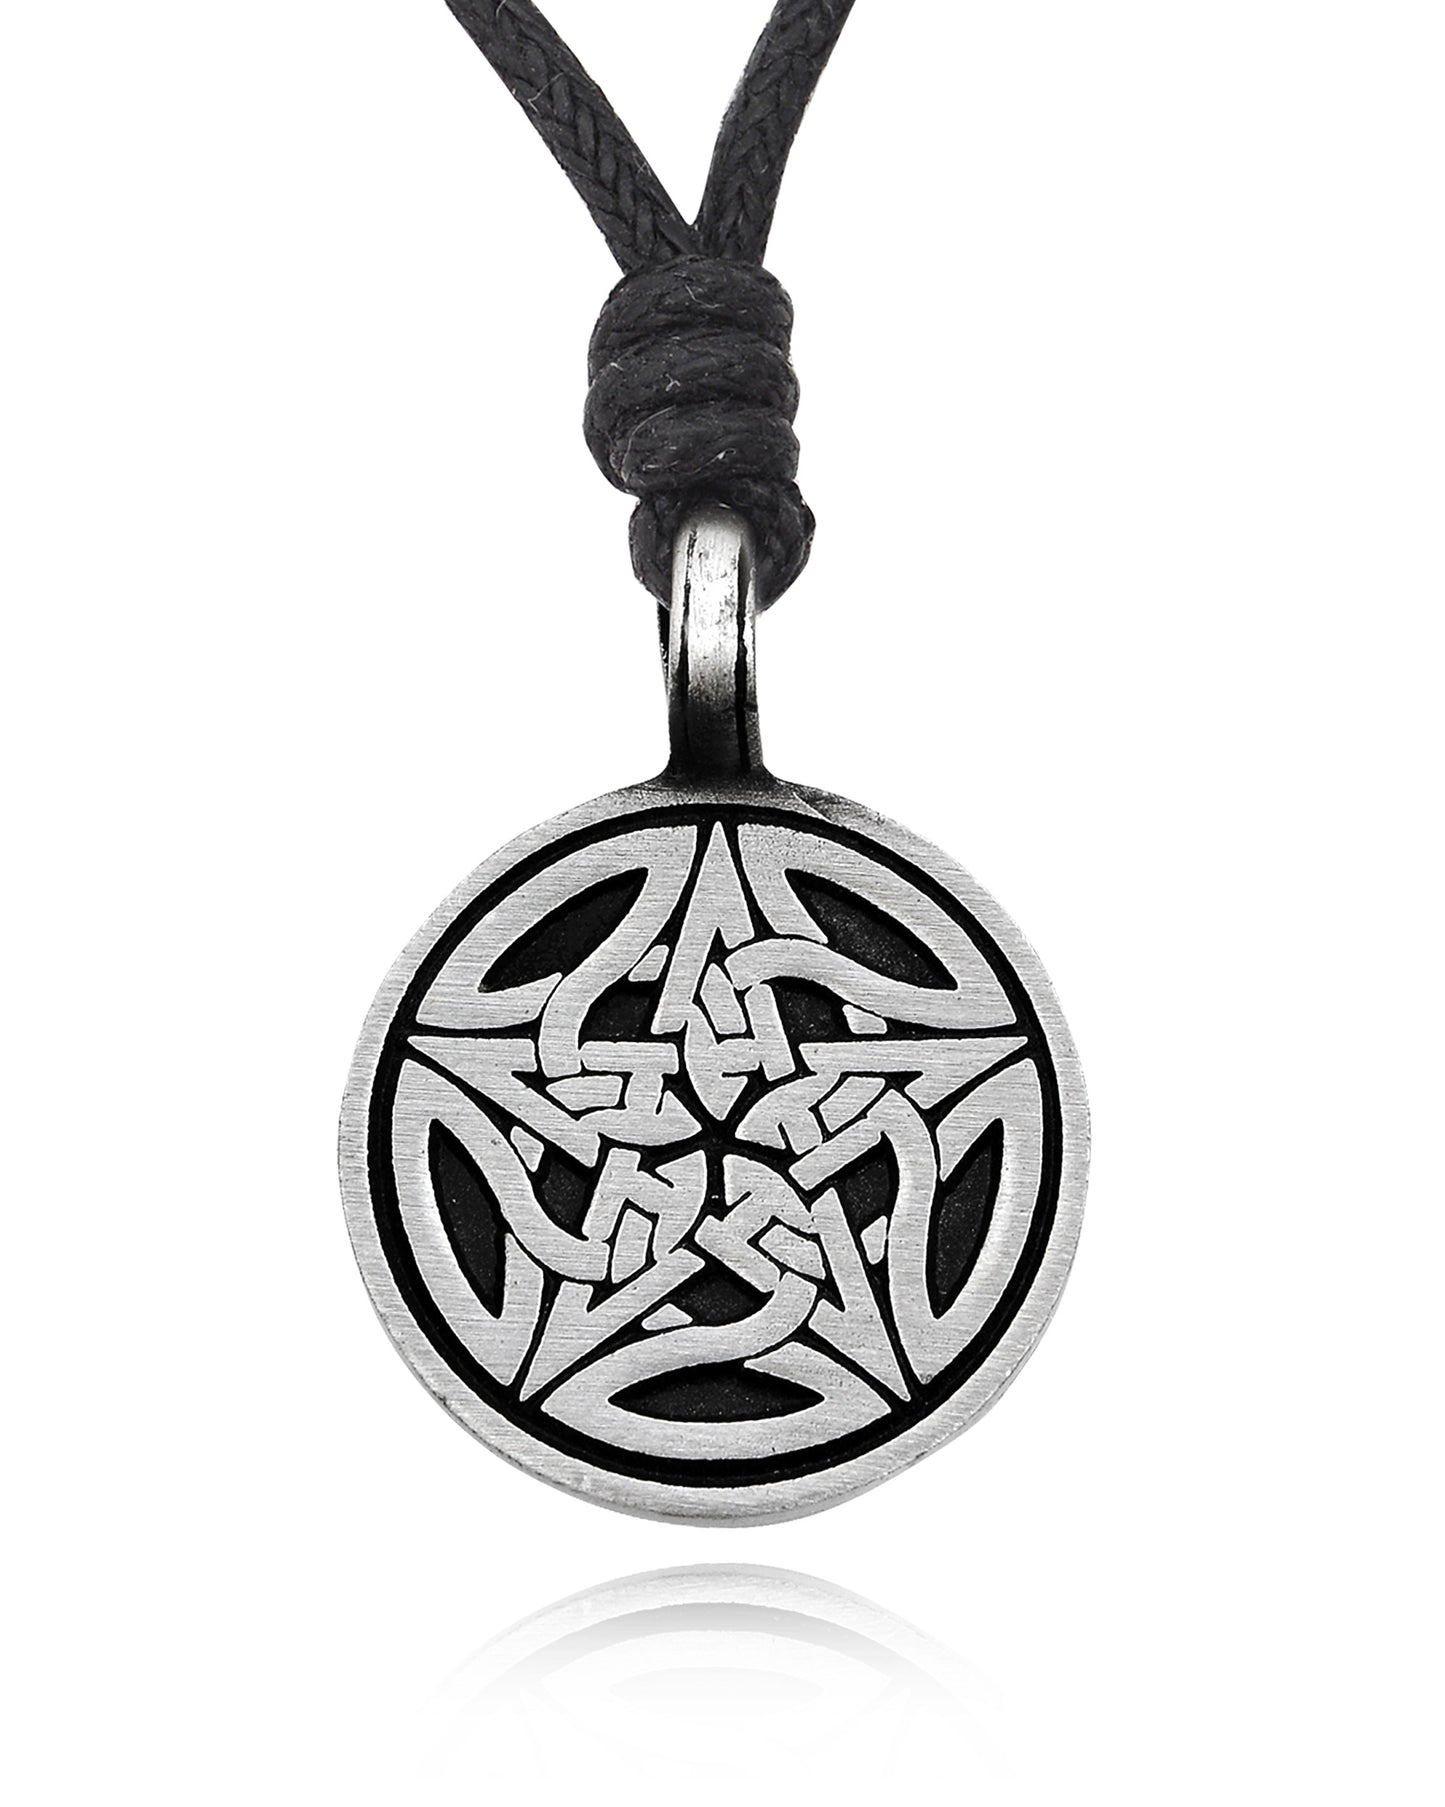 Handmade Pentagram 5 Pointed Star Silver Pewter Charm Necklace Pendant Jewelry